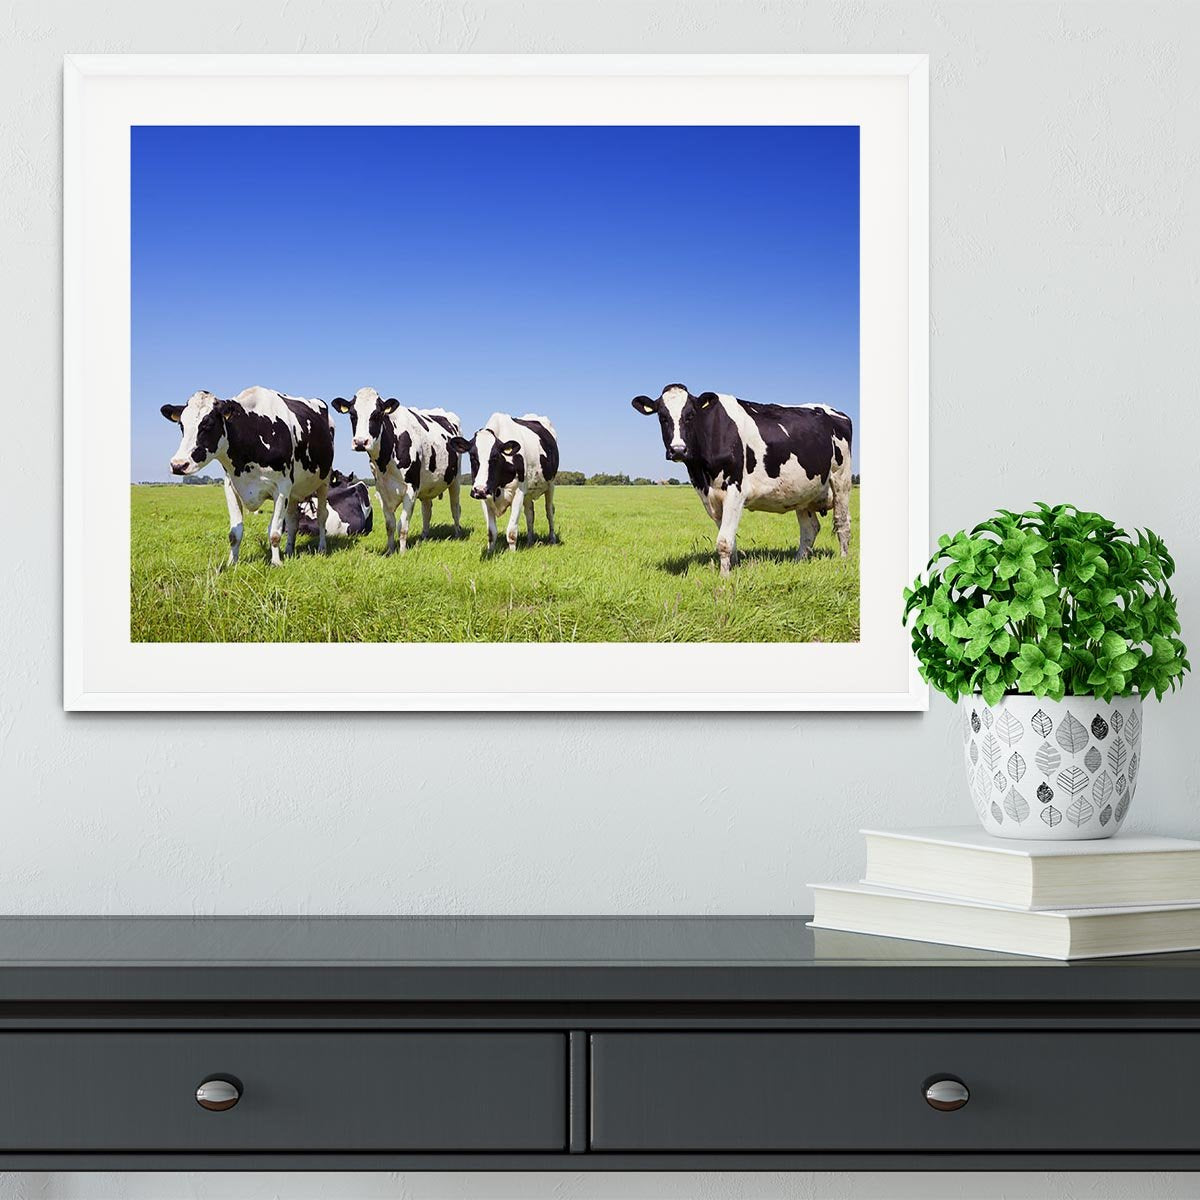 Black and white cows in a grassy field Framed Print - Canvas Art Rocks - 5